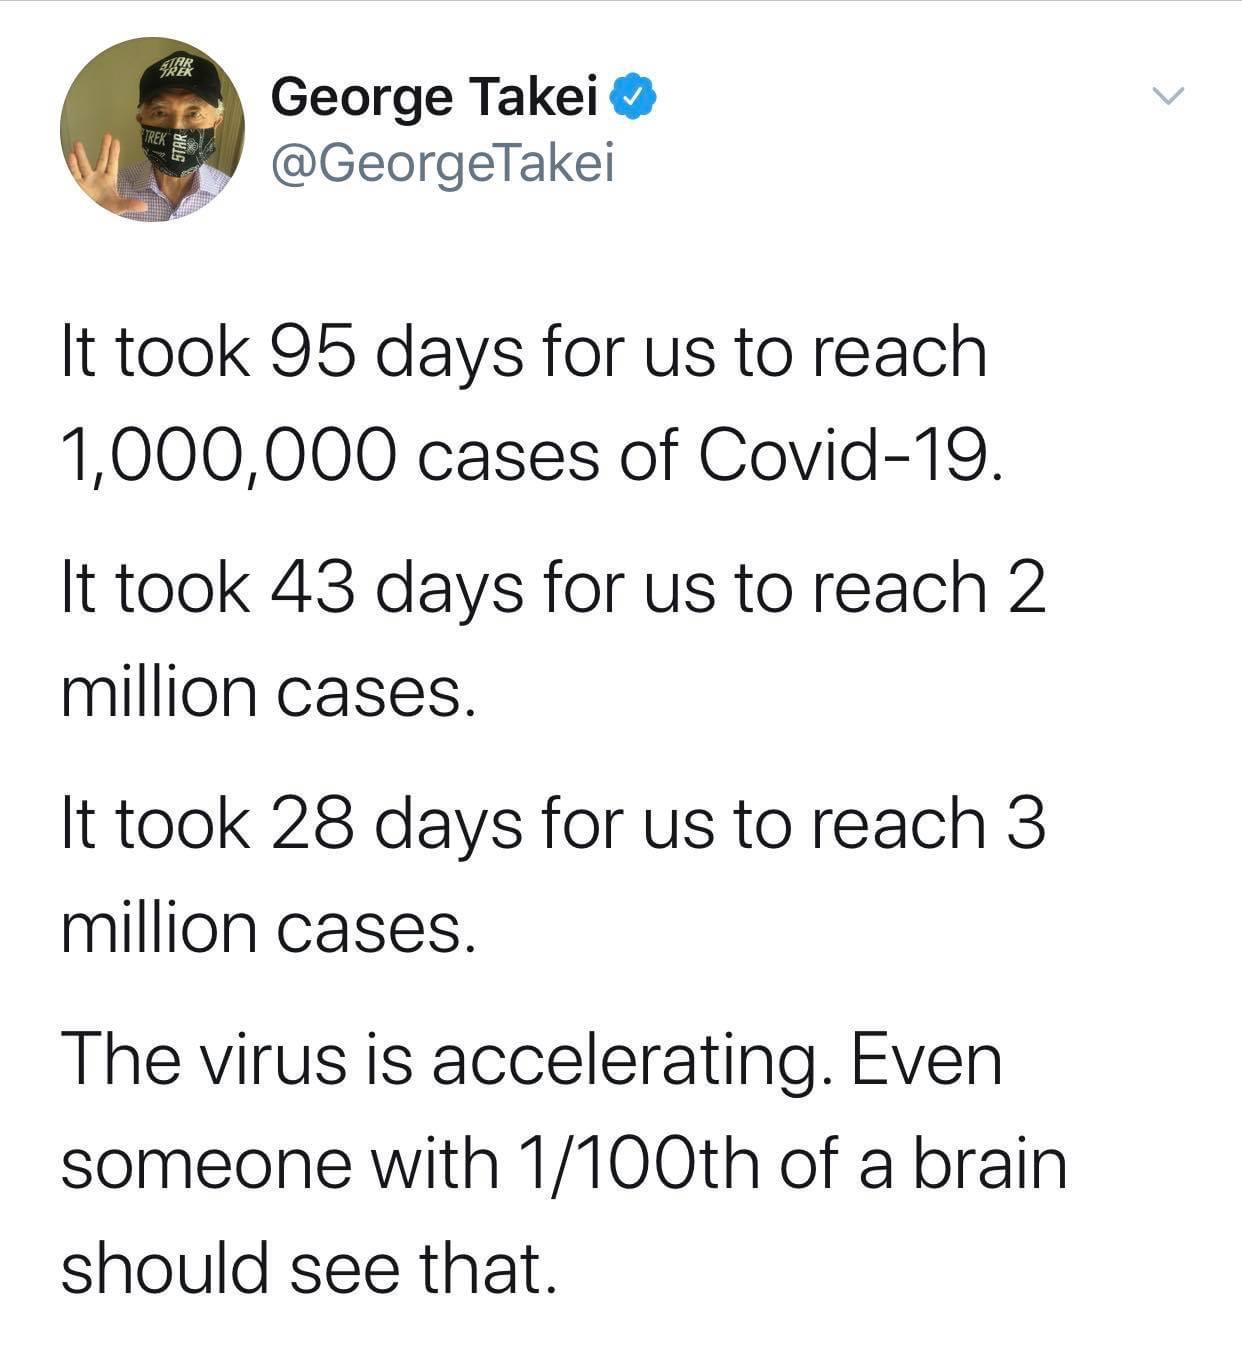 Political, Trump, COVID, Texas, Florida, Cases Political Memes Political, Trump, COVID, Texas, Florida, Cases text: George Takei O @GeorgeTakei It took 95 days for us to reach 110001000 cases of Covid-19. It took 43 days for us to reach 2 million cases. It took 28 days for us to reach 3 million cases. The virus is accelerating. Even someone with 1/ 100th of a brain should see that. 